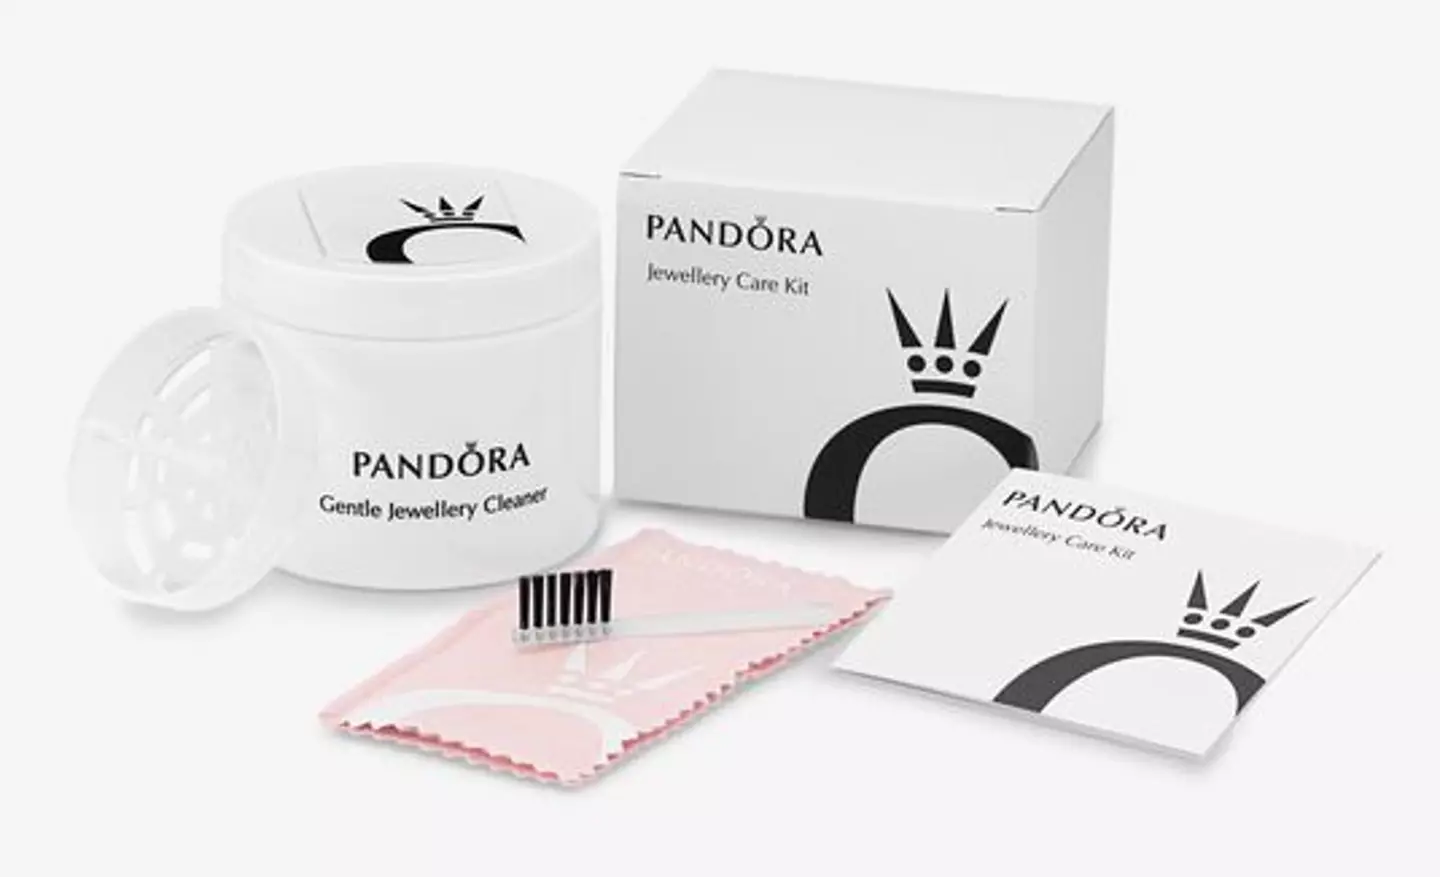 You can buy the Pandora cleaning kit online or in store (